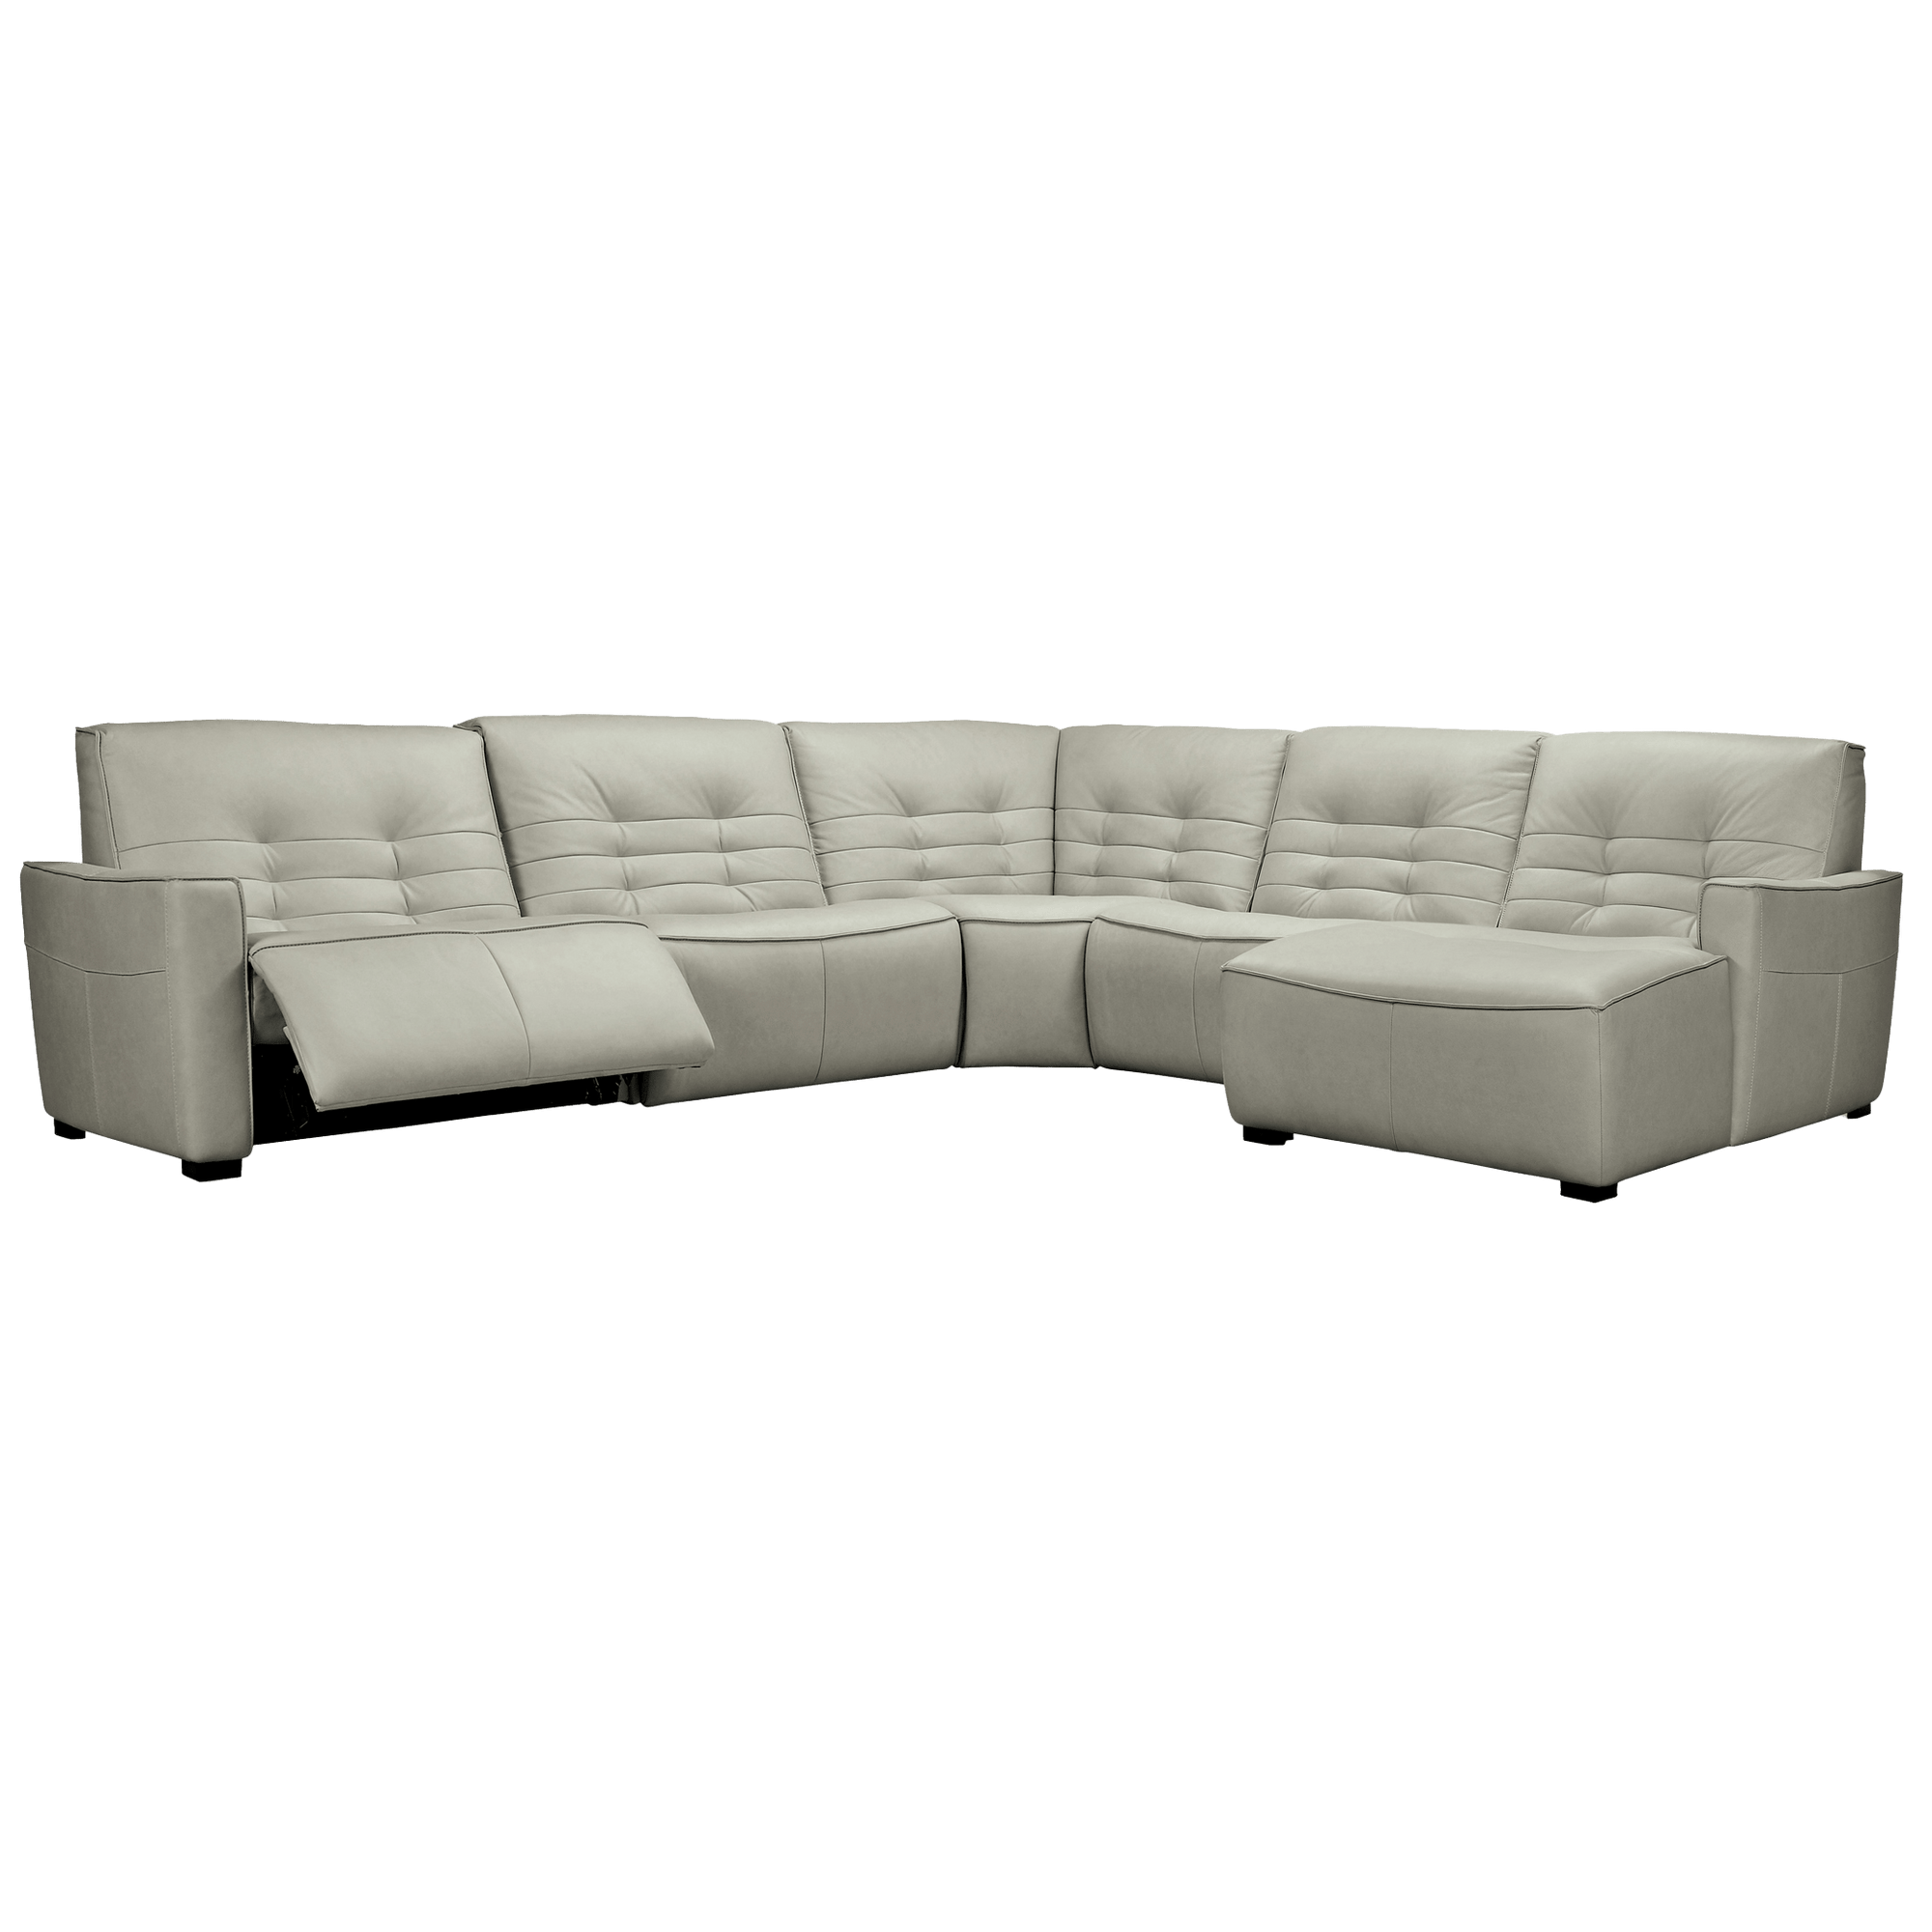 Rancell 5 - Piece Leather Upholstered Sectional, Gray - Coja